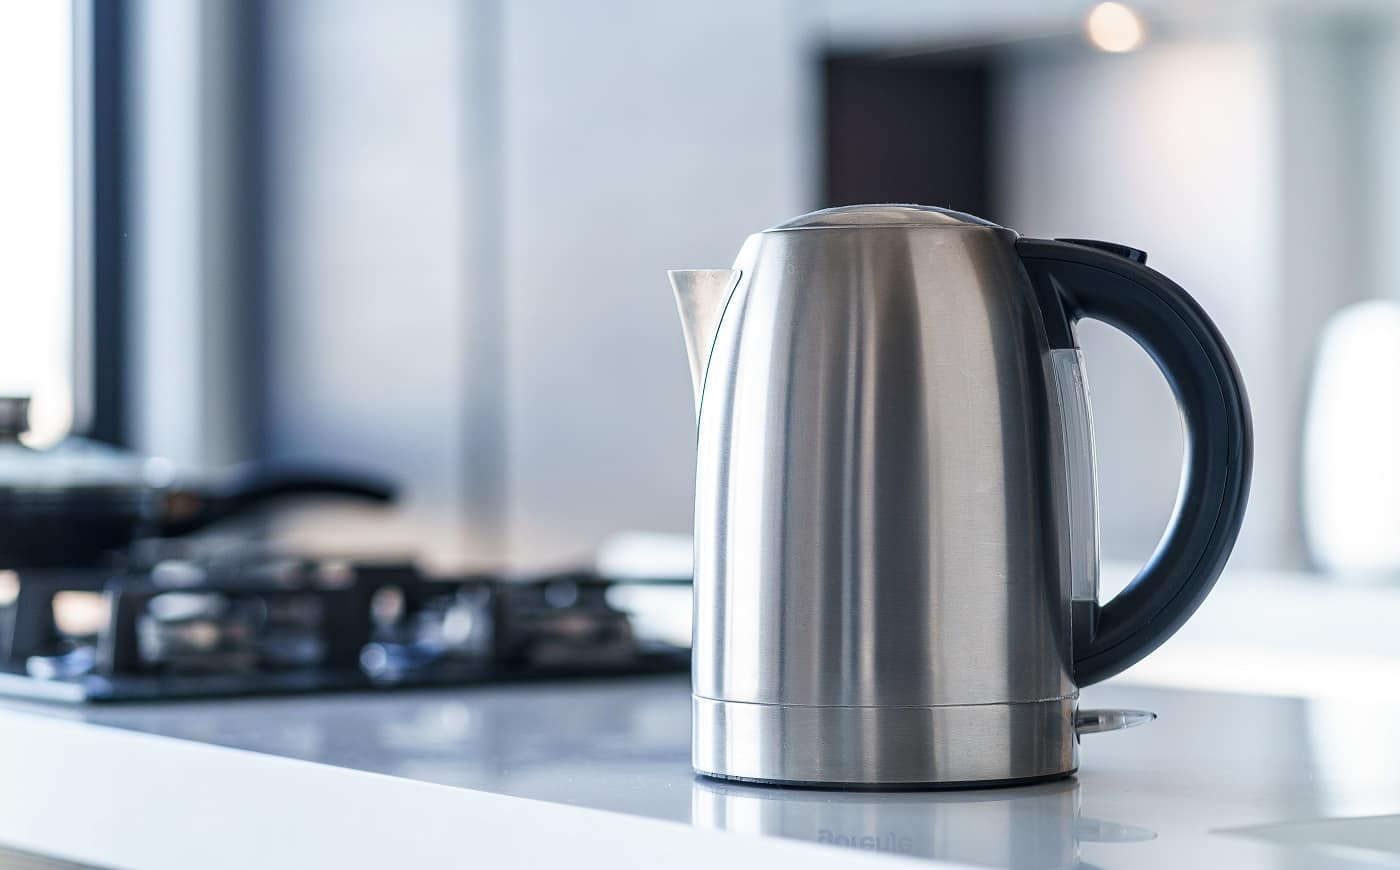 Silver metal electric kettle for boiling water and making tea on a table in the kitchen interior. Household kitchen appliances for makes hot drinks. Top Electric Kettles Without Plastic Verdict